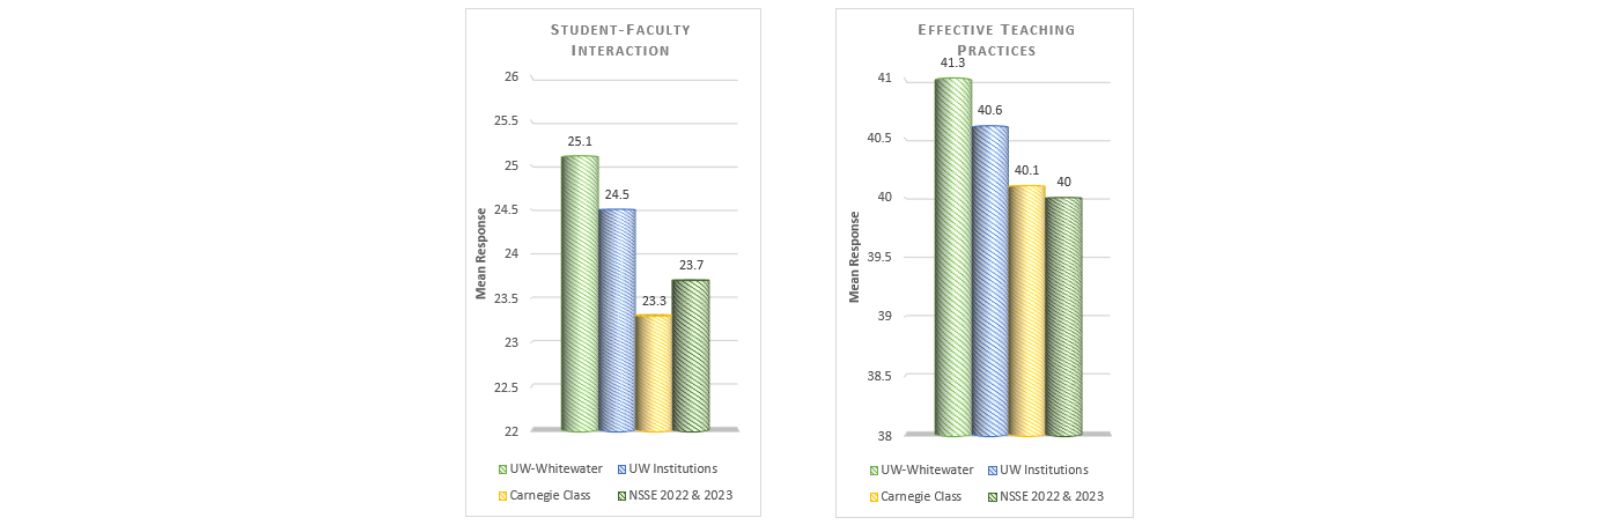 Data showing experiences with faculty 